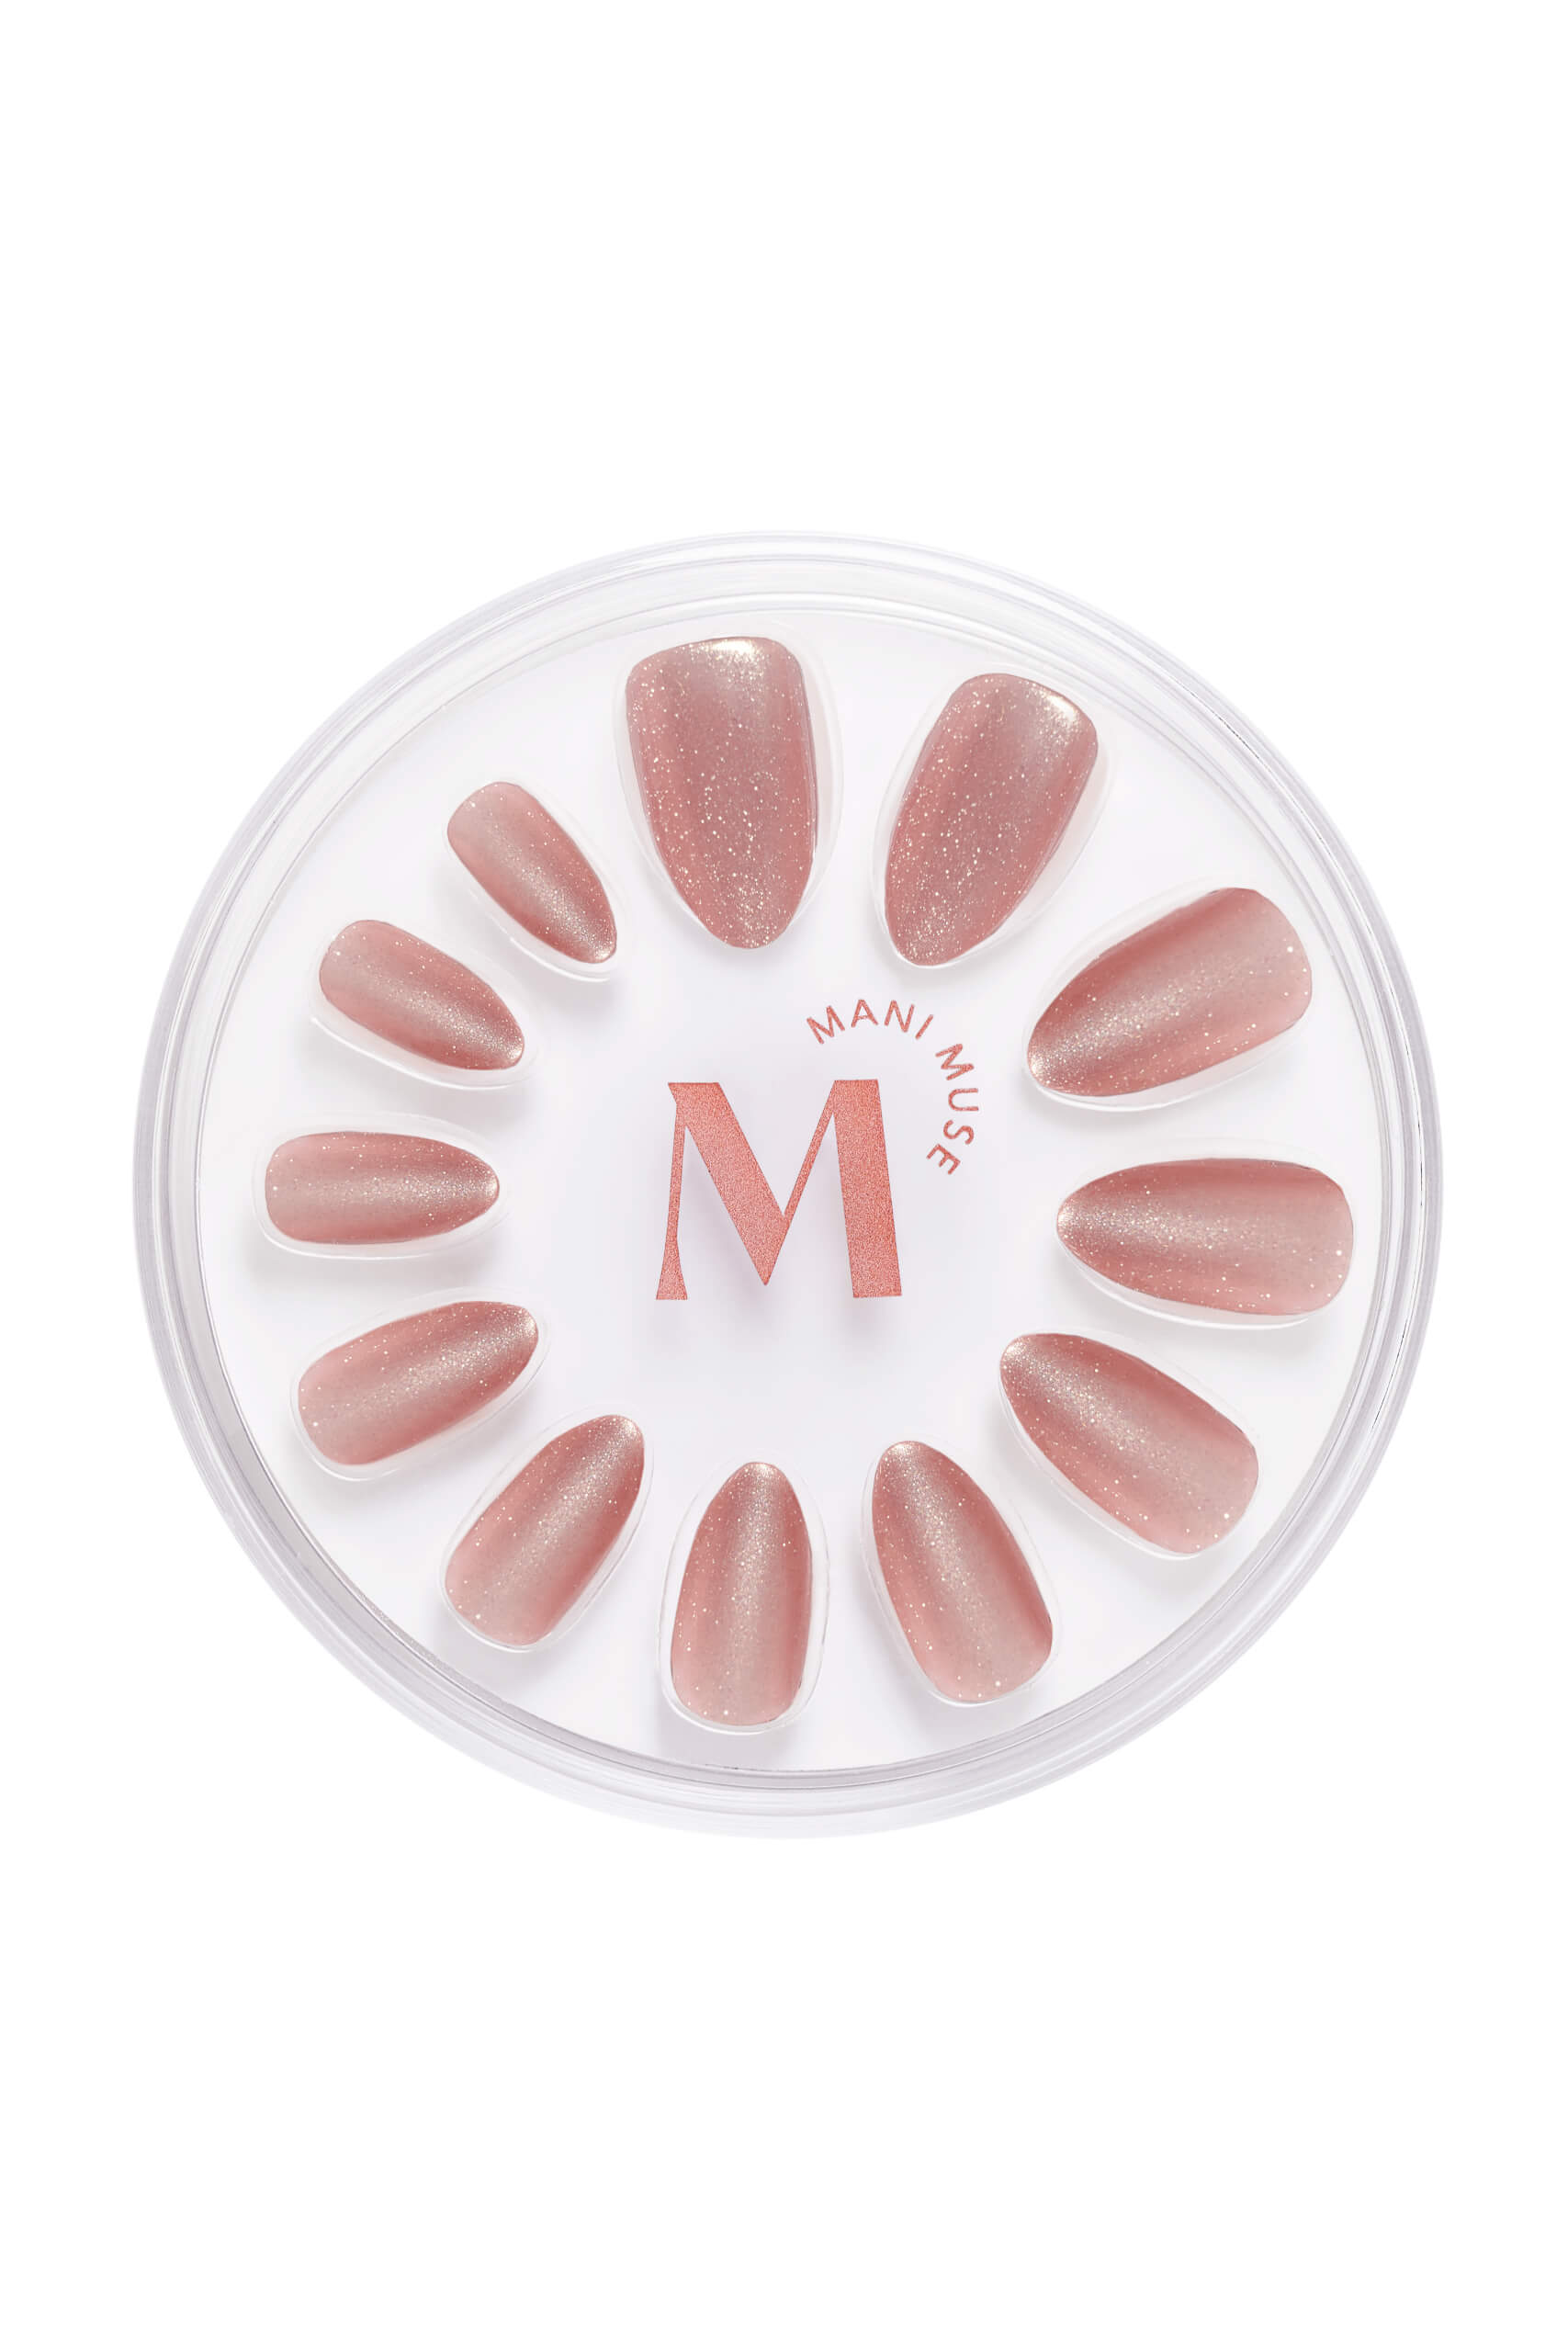 Mani Muse Pinky Blinders Press-on Nails - Almond